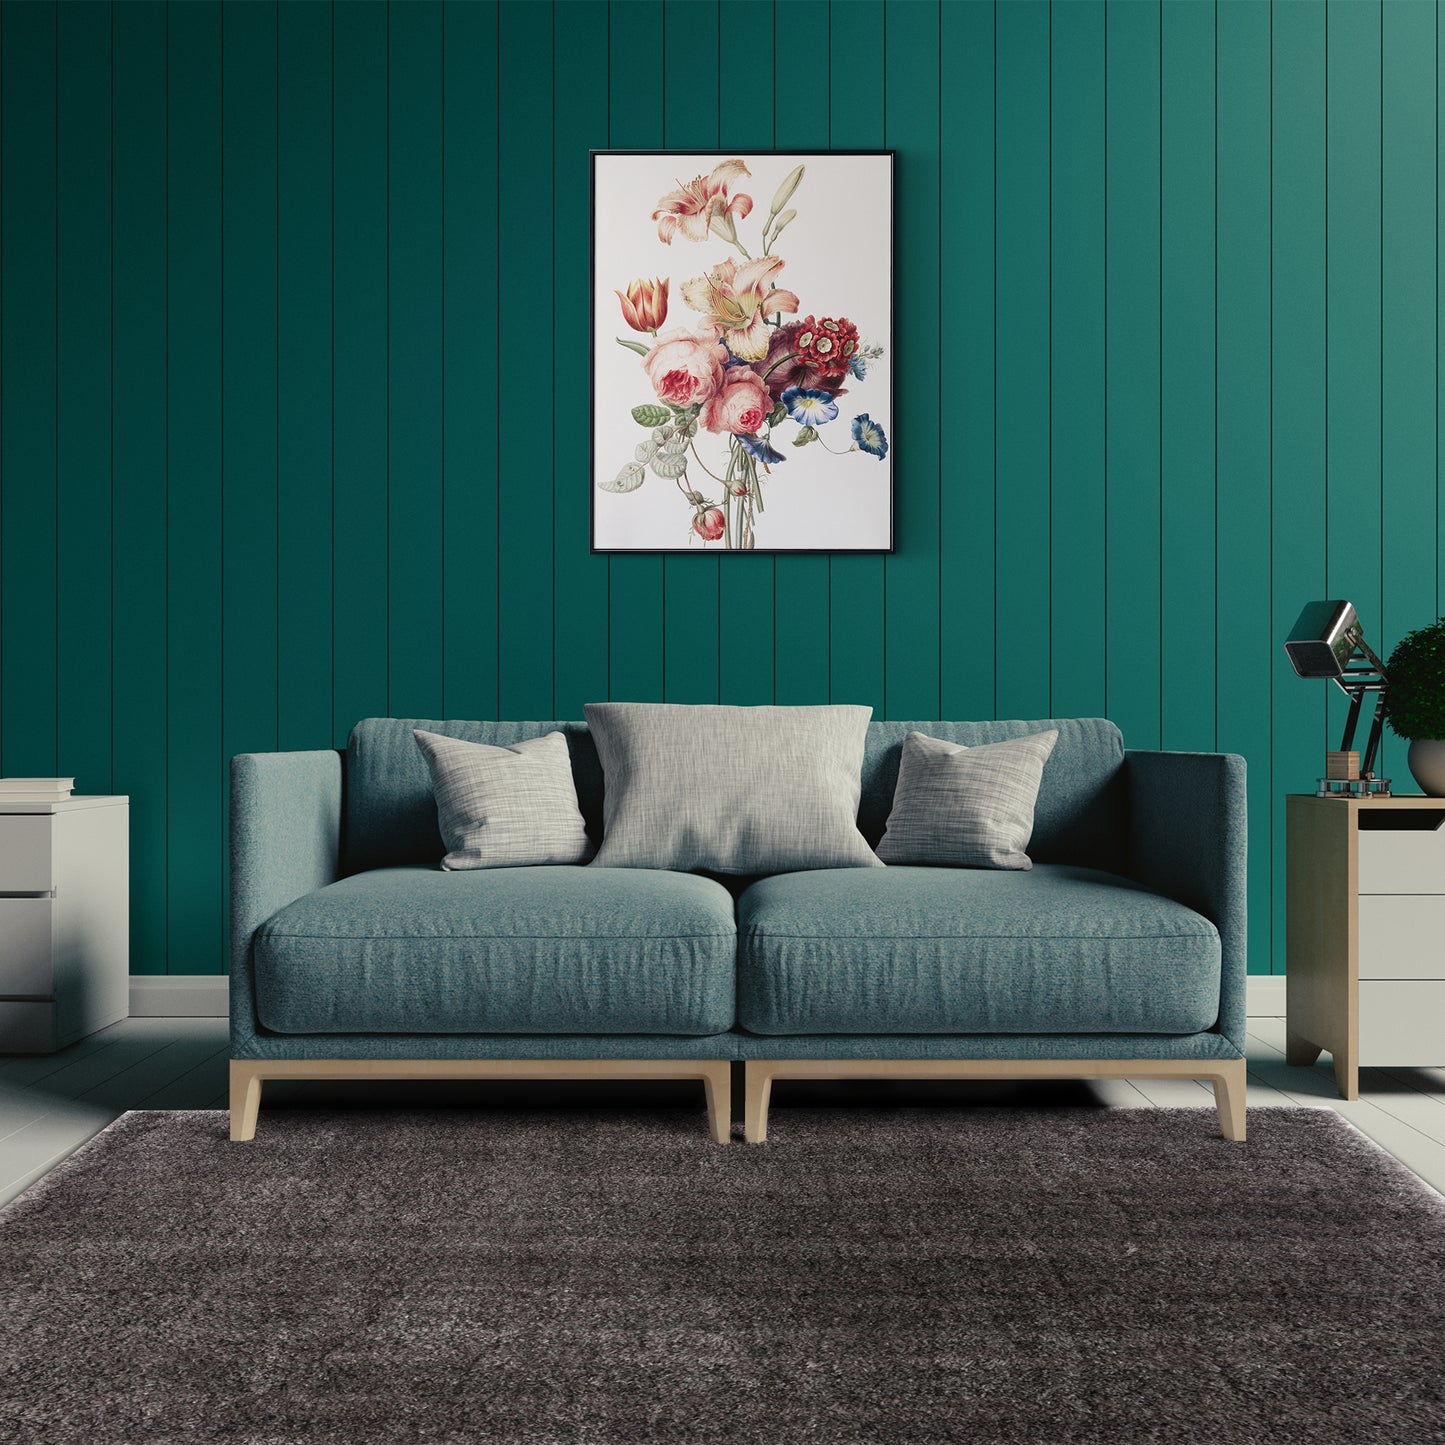 Green Scandinavian living room with Grey Shag Rug, green sofa, side tables and floral wall art